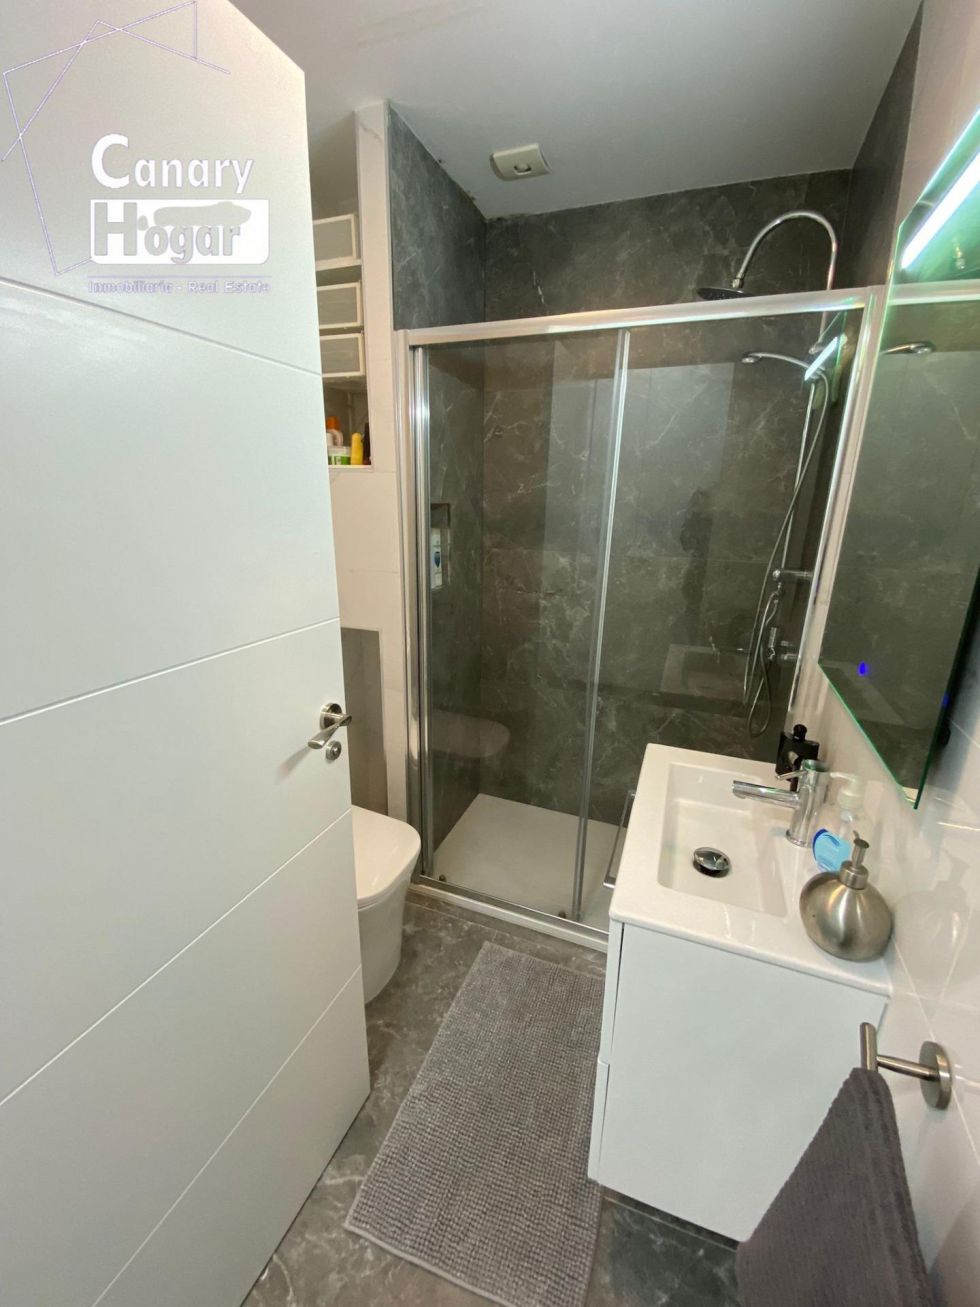 Flat for sale in  Chayofa, Spain - 052751